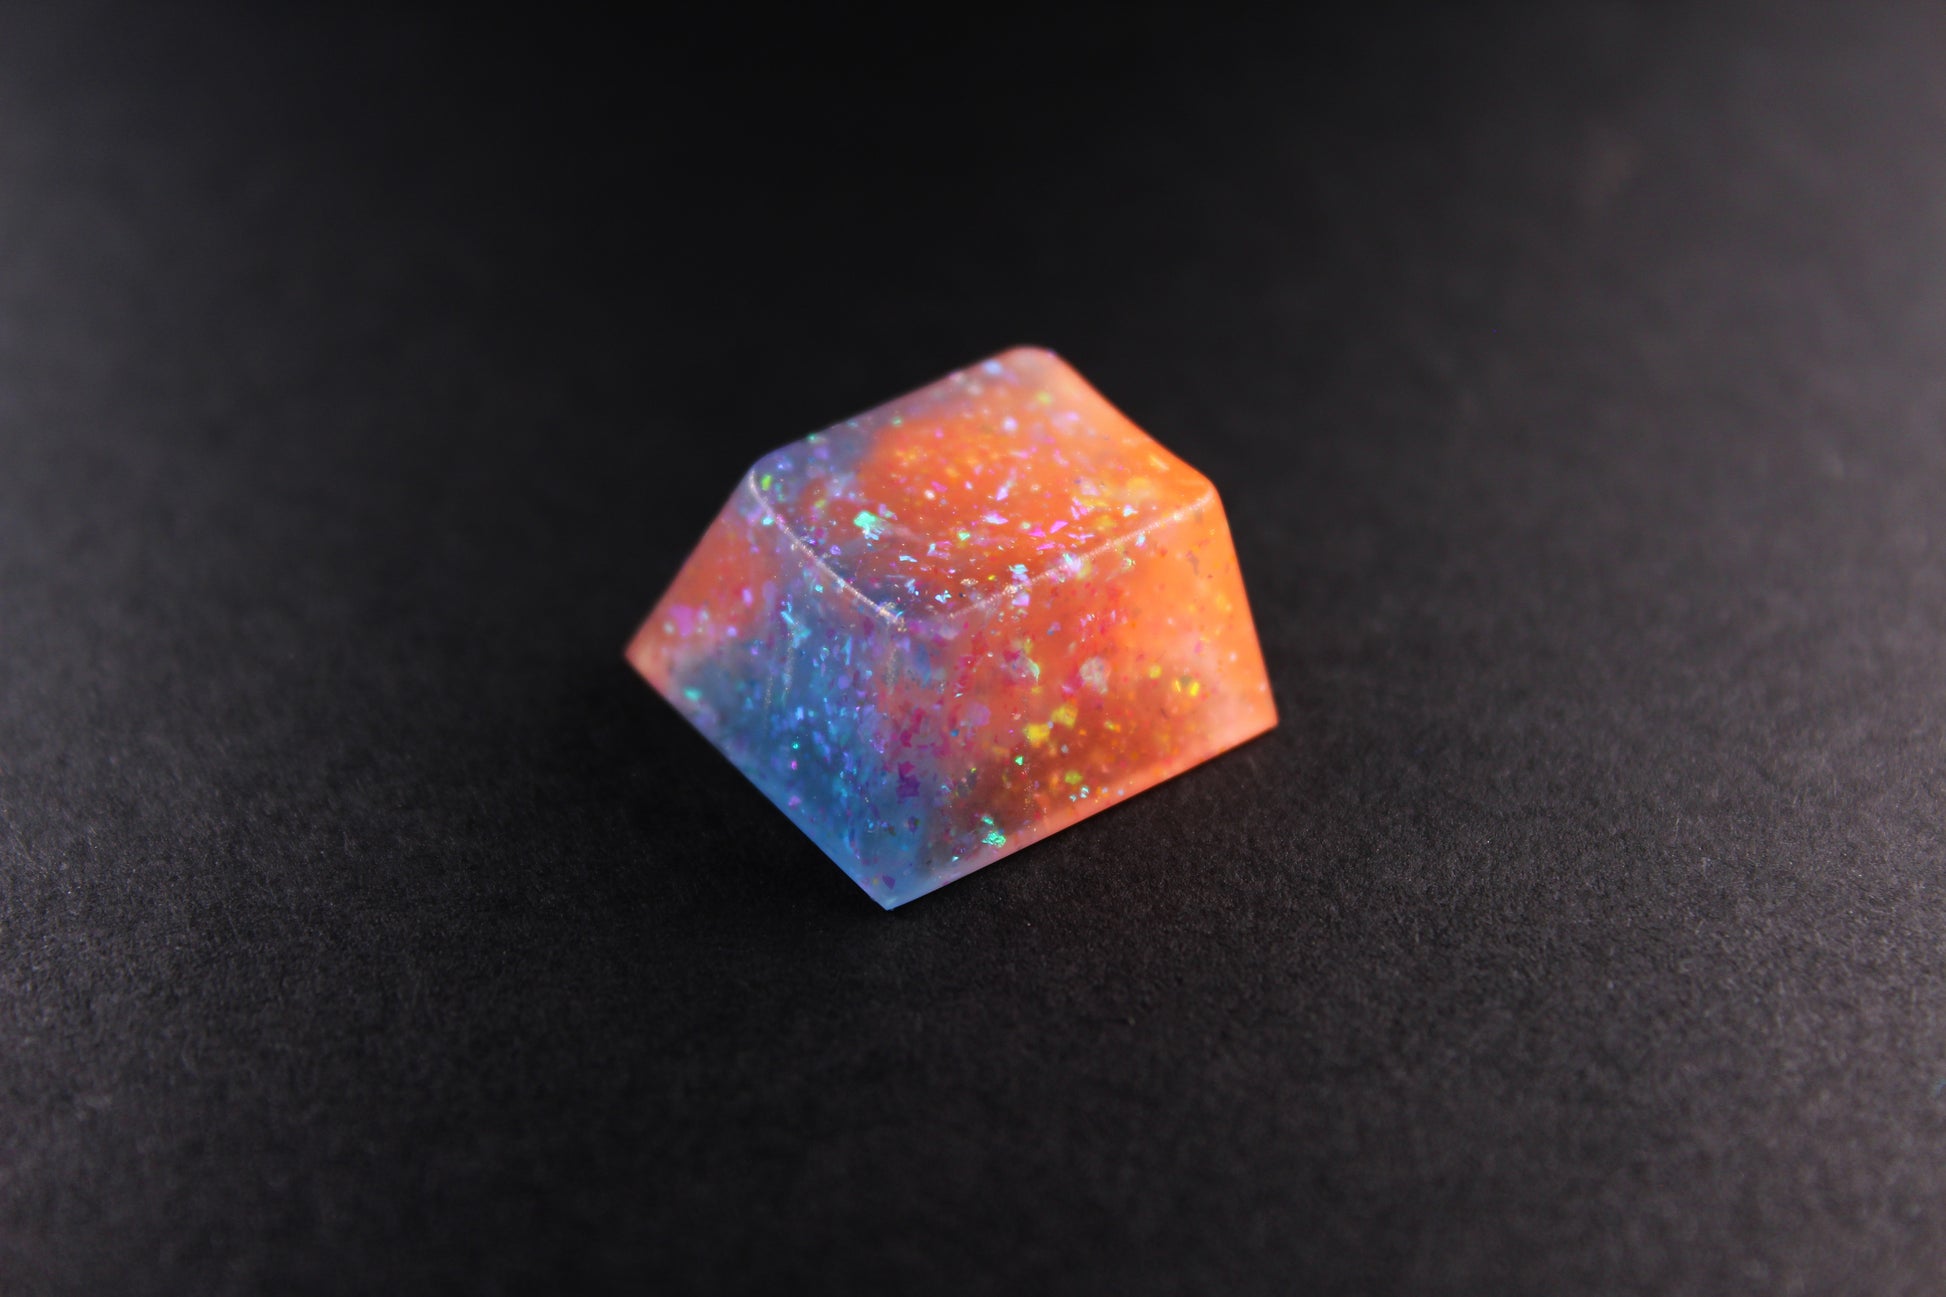 Cherry Esc - Elemental Glow 4 - PrimeCaps Keycap - Blank and Sculpted Artisan Keycaps for cherry MX mechanical keyboards 